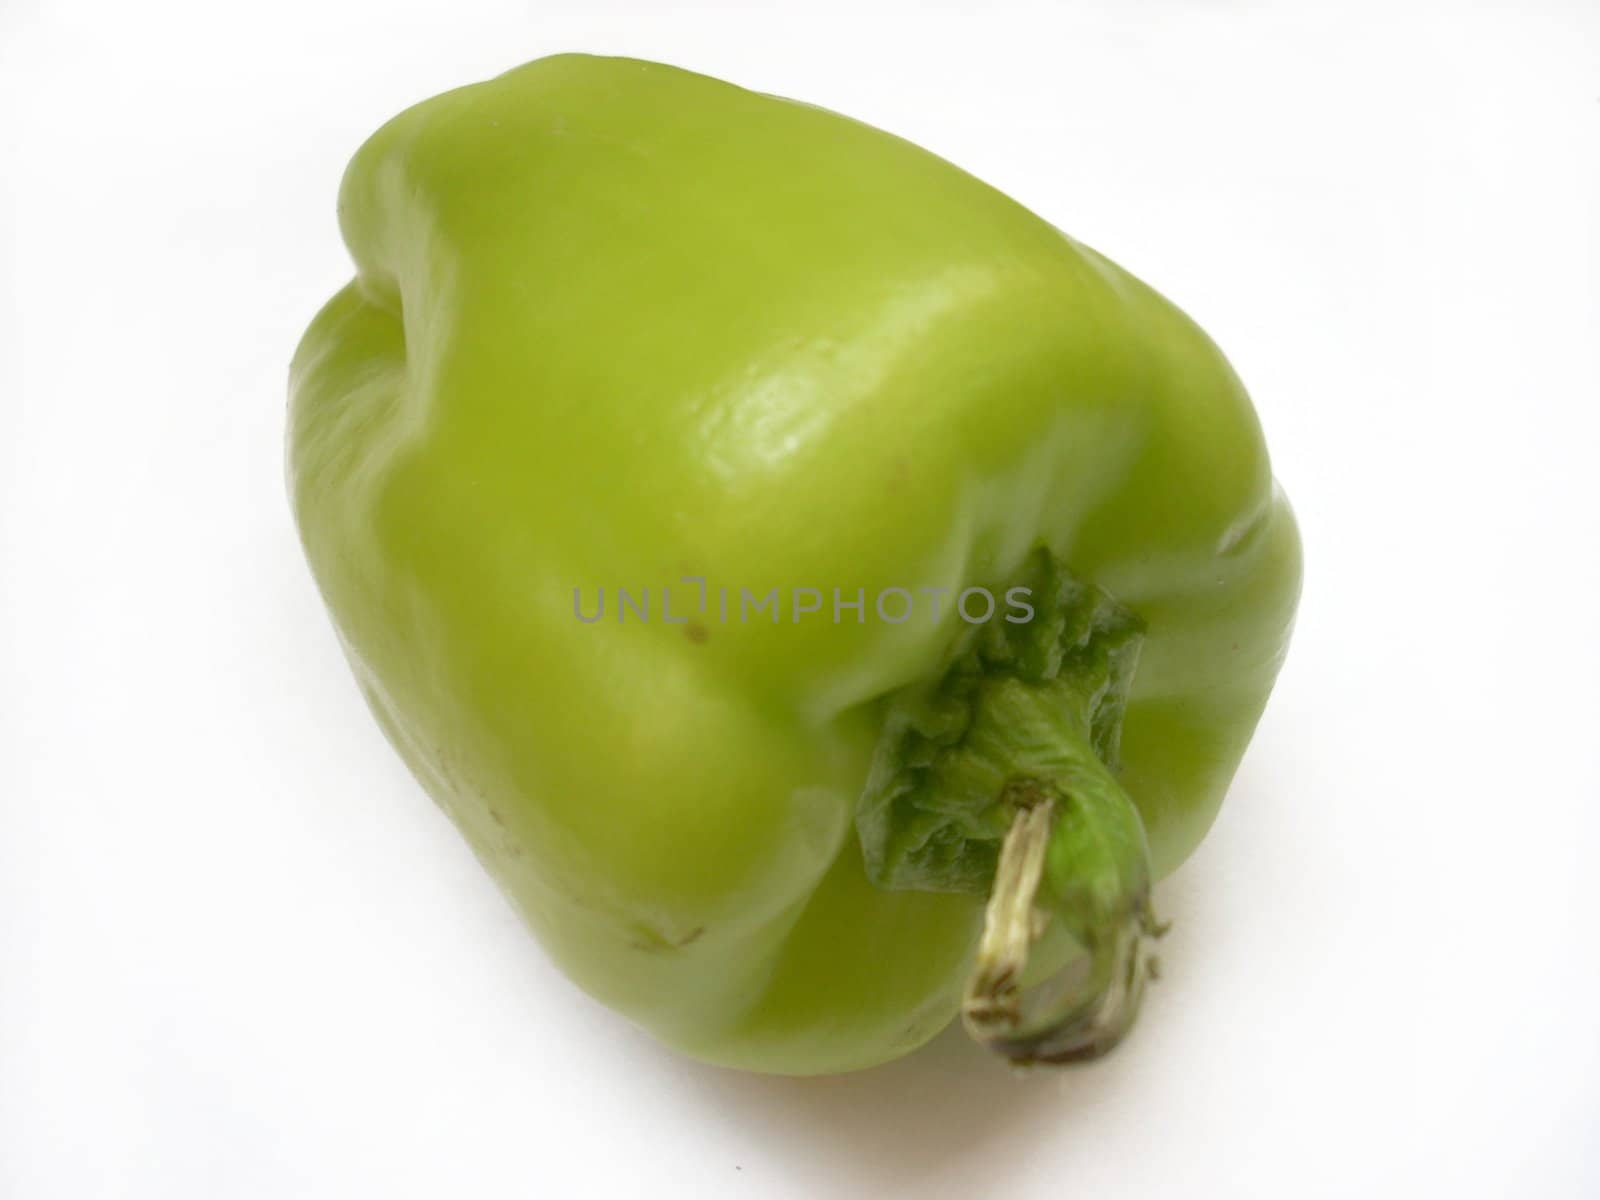 This is a photograph of a fresh sweet pepper